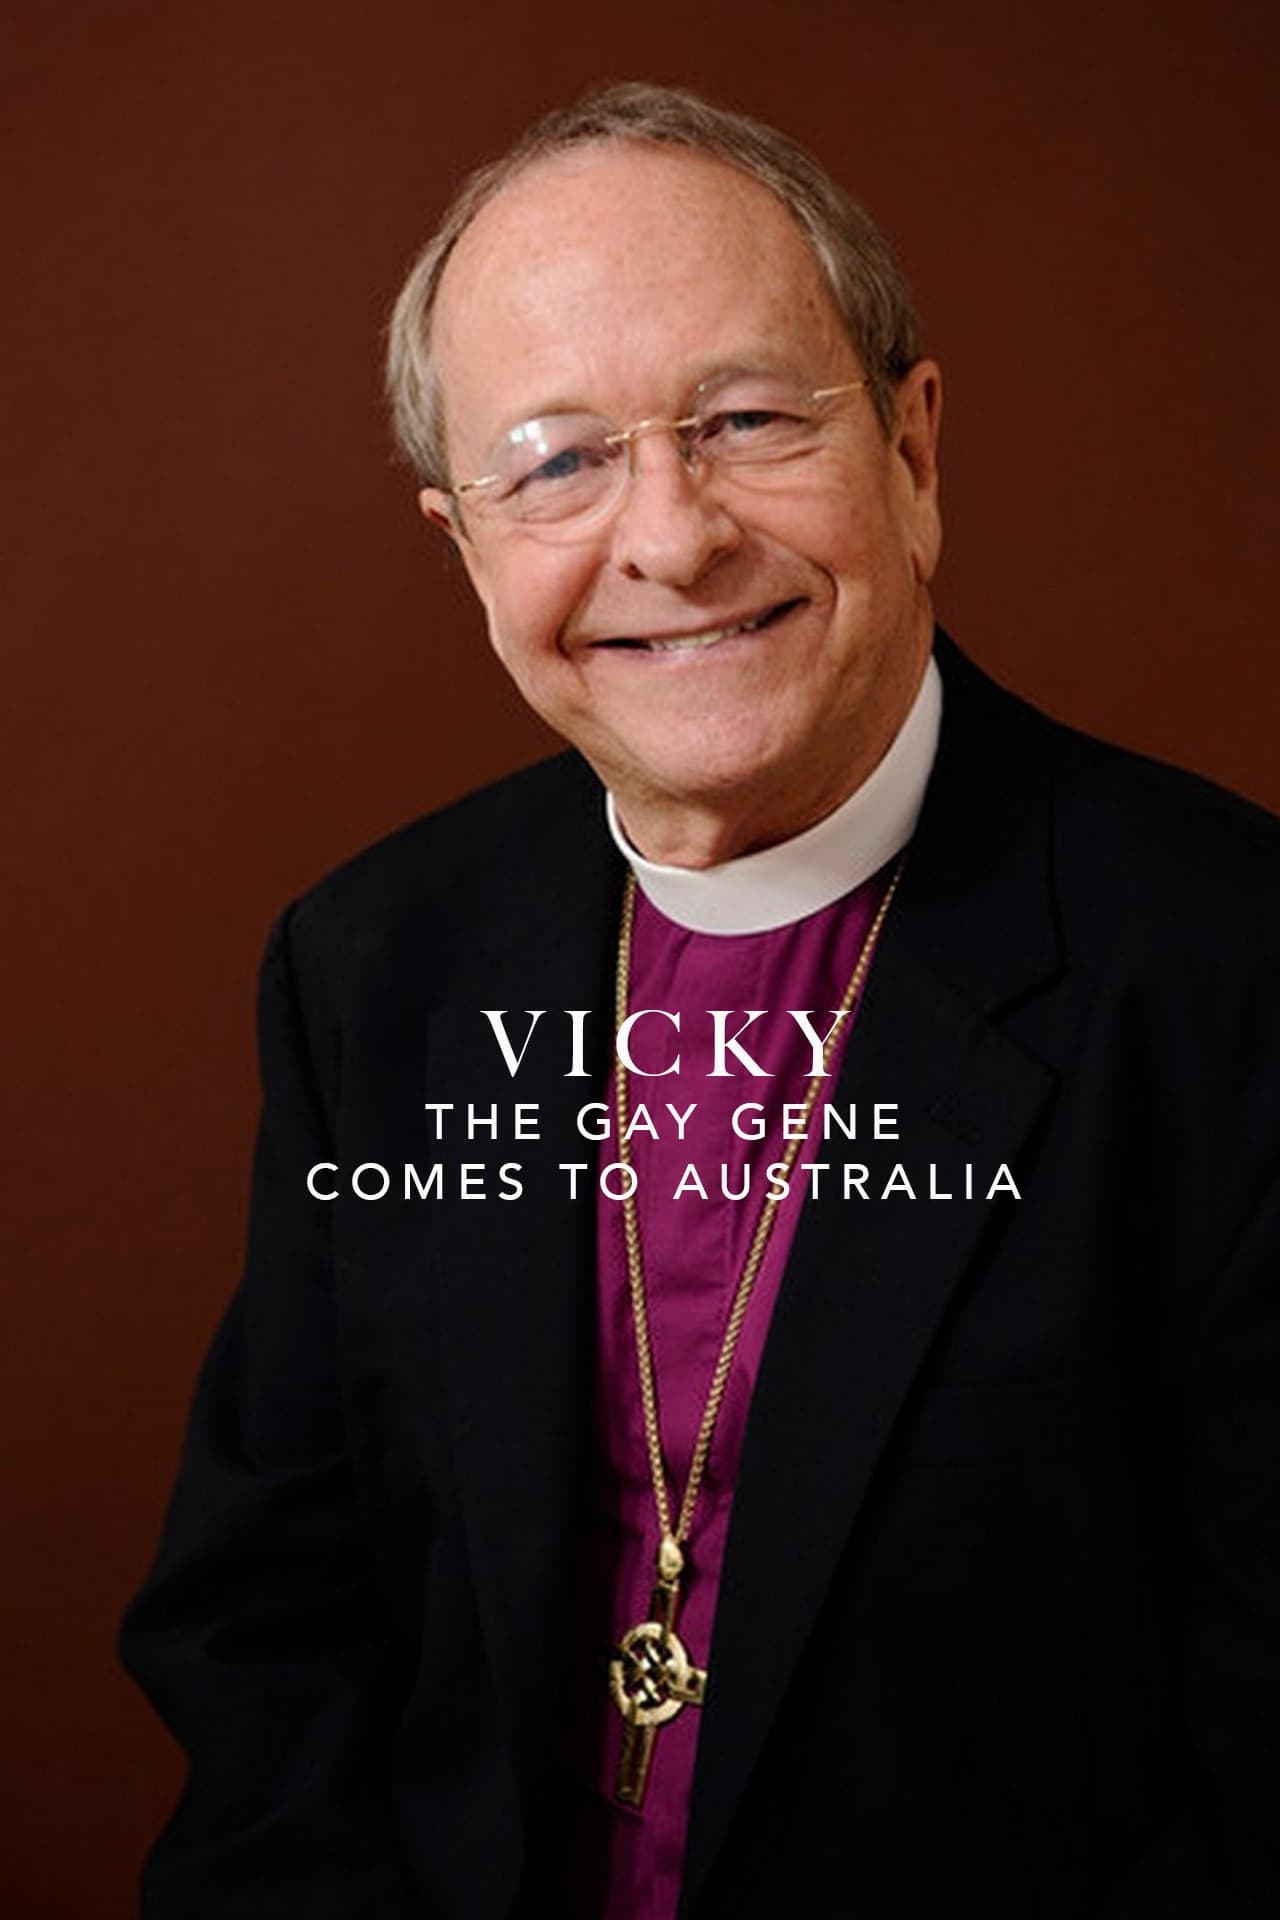 Vicky: The Gay Gene Comes to Australia